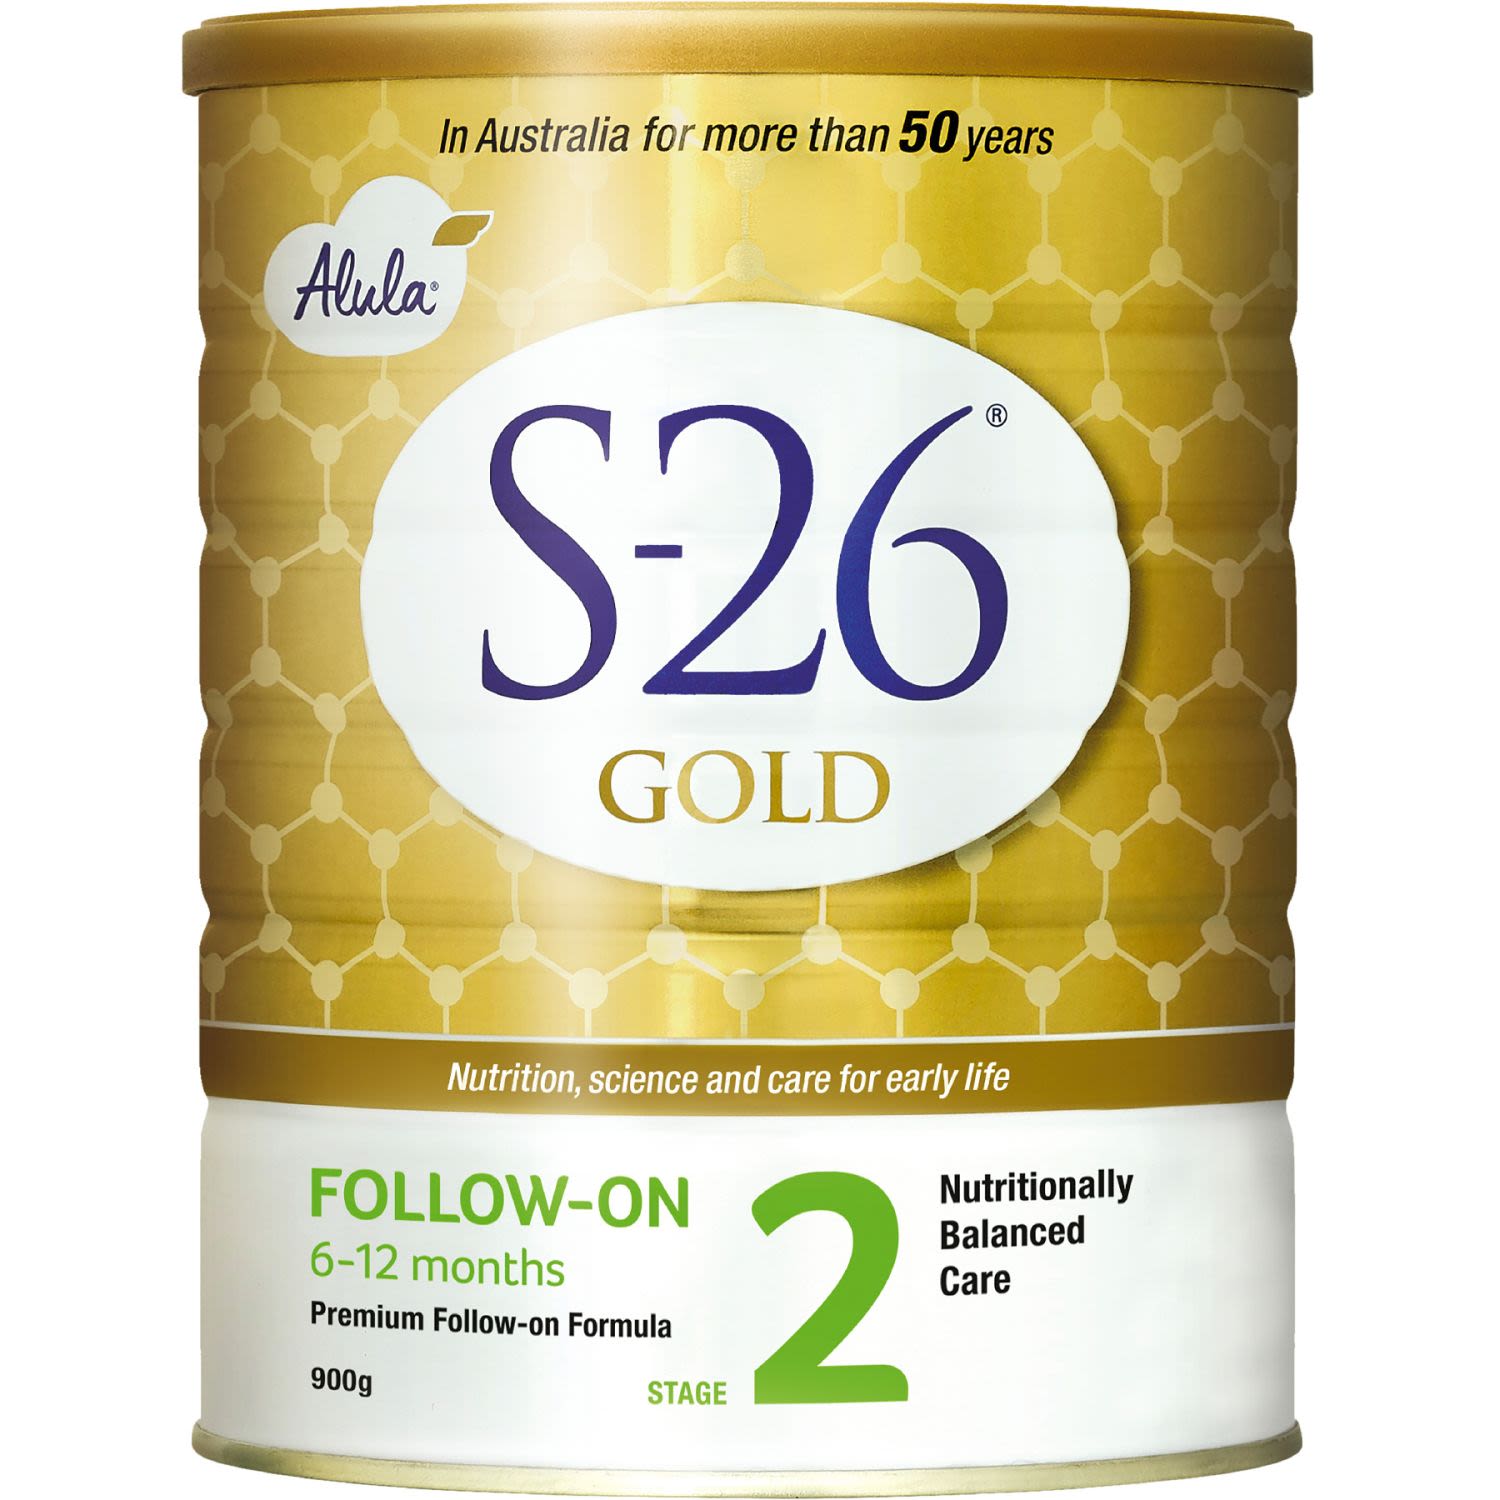 Nutrition, science and care for early life.

S-26 Alula Gold Follow-on formula is our most advanced follow-on formulation in Australia.
A premium follow-on formula specially tailored to meet the changing nutritional needs of your child from 6 months old, as a well-balanced diet is important.
The protein source of S-26 Alula Gold Follow-on Infant Formula is cow's milk.
<br /> <br /> <br /><br />Country of Origin: New Zealand